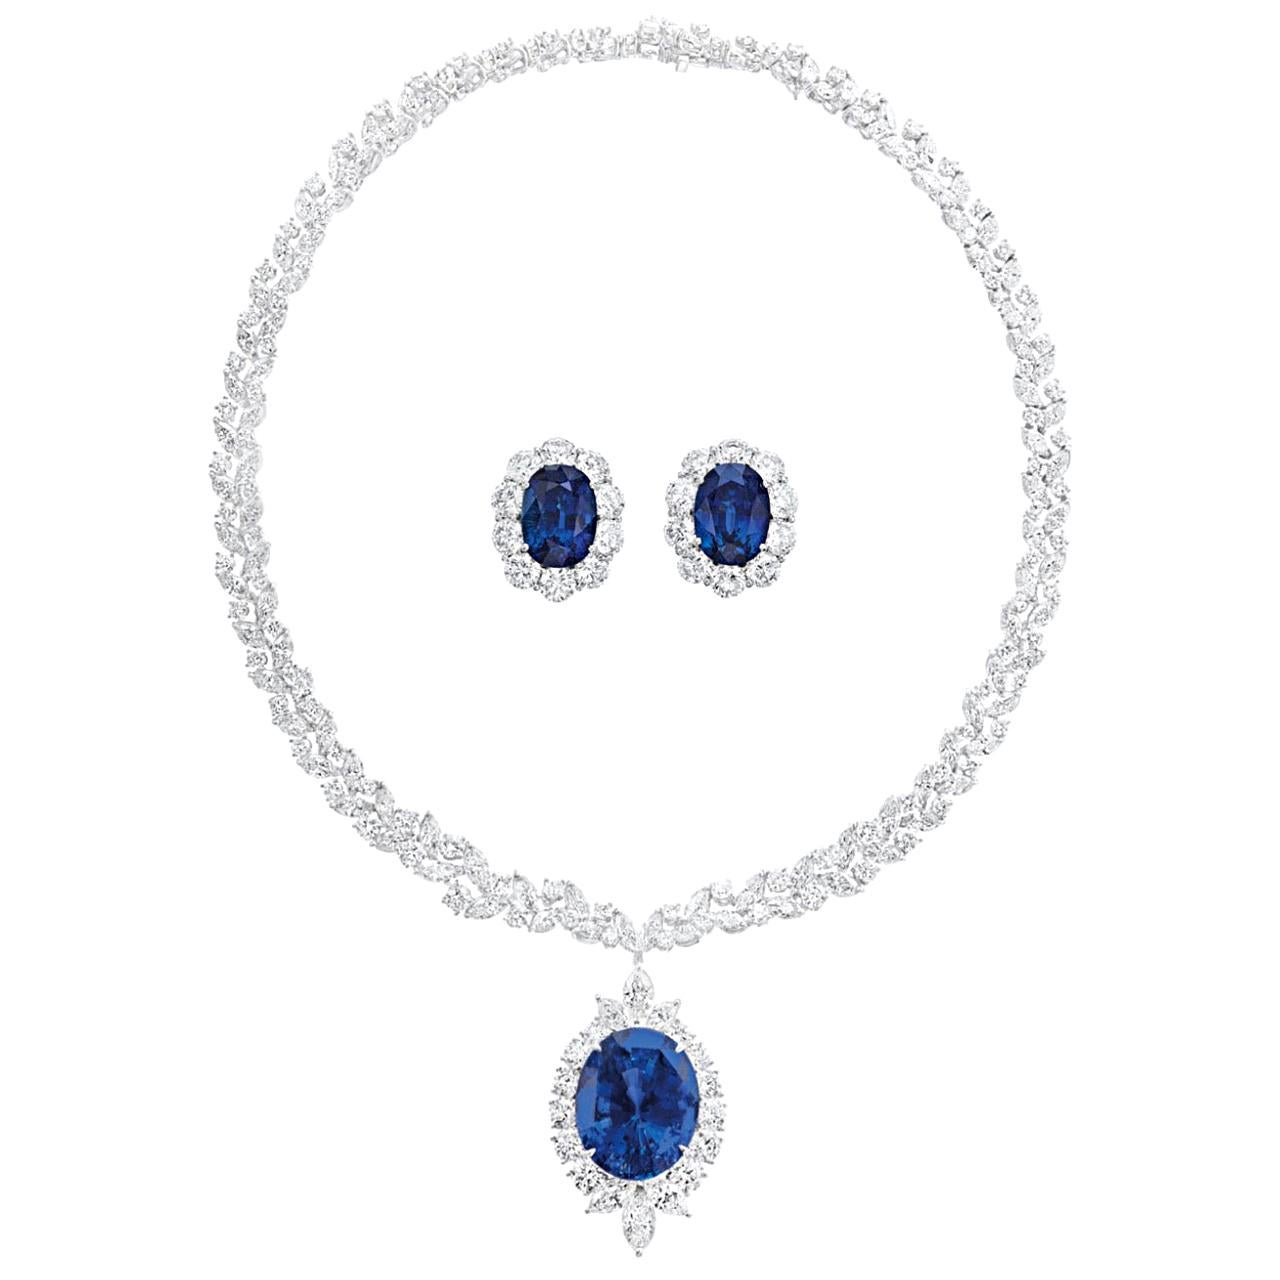 Ceylon Sapphire and Diamond Necklace and Earrings